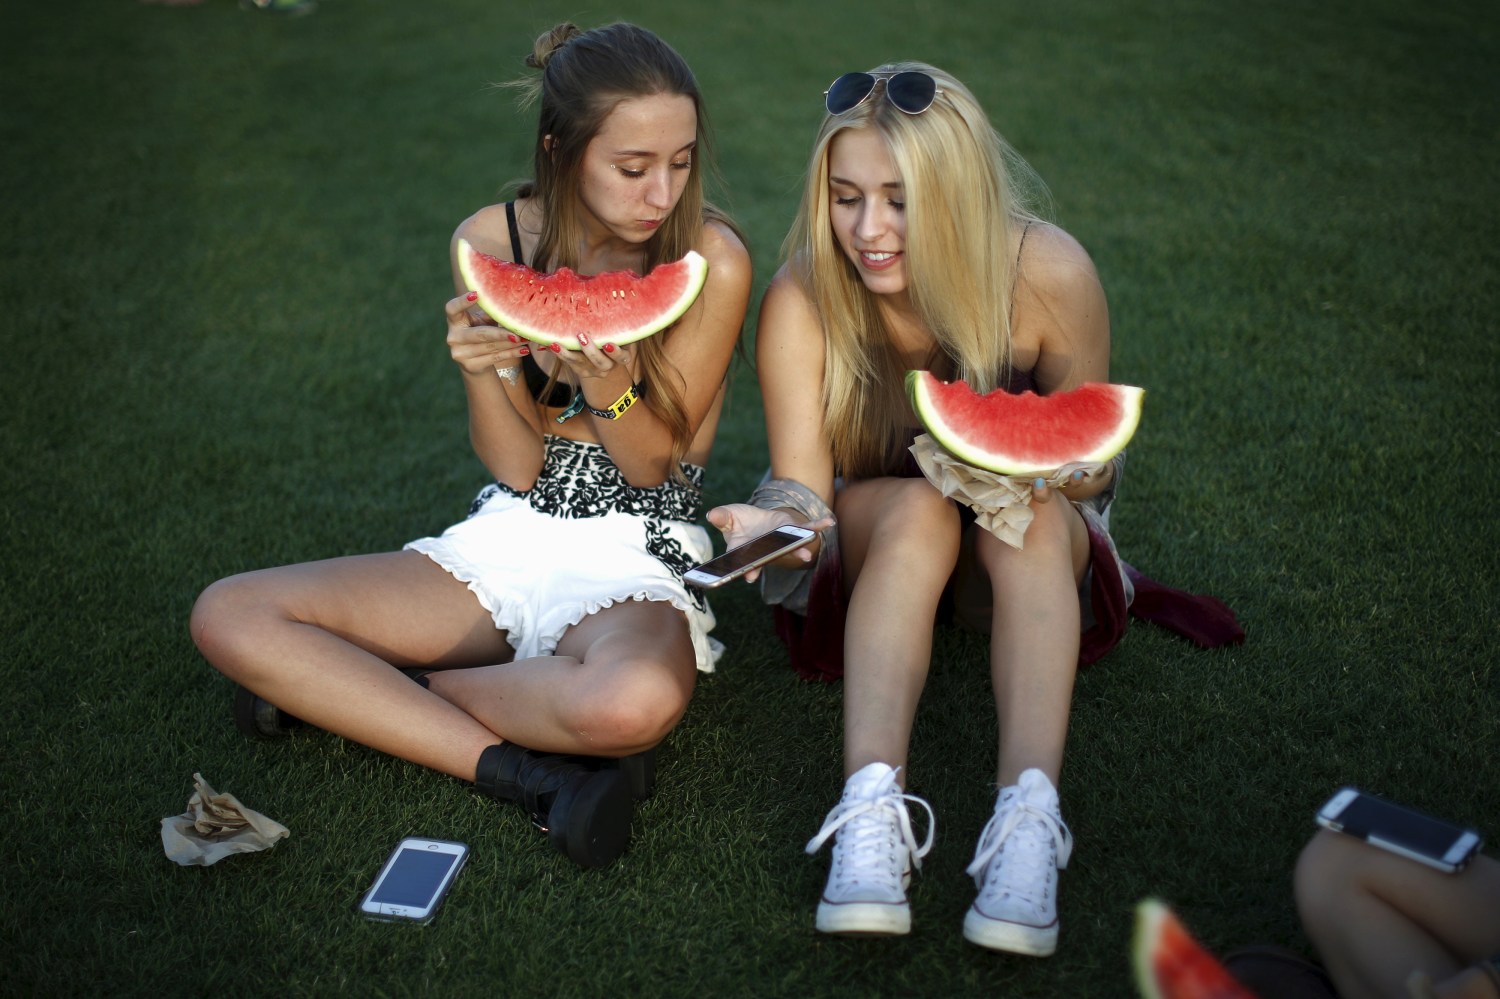 Women eat watermelons at the Coachella Valley Music and Arts Festival in Indio, California April 10, 2015. REUTERS/Lucy Nicholson - GF10000055583